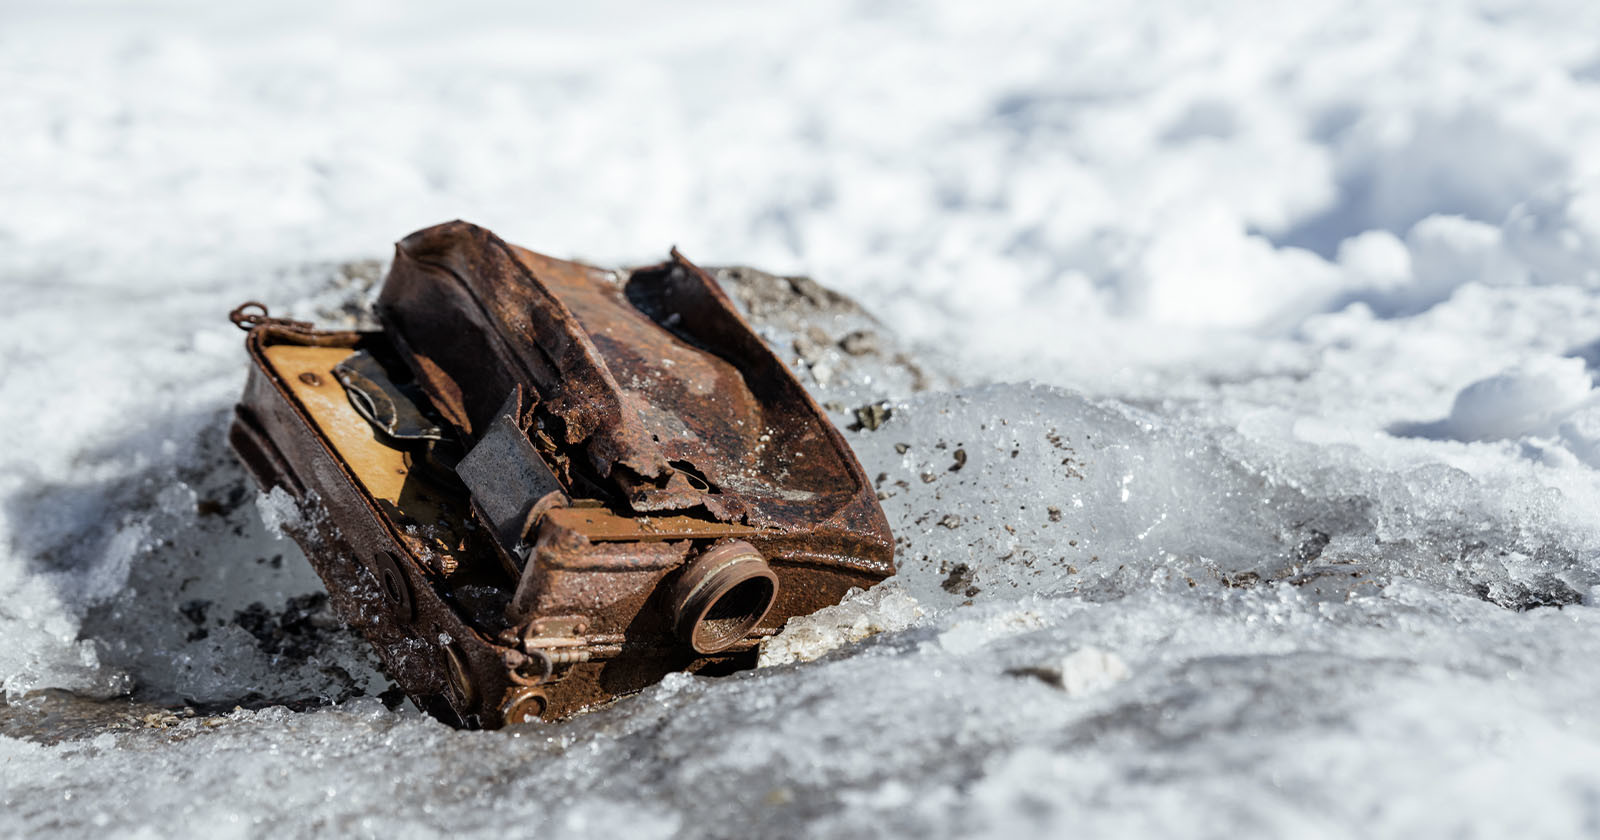 Cameras Abandoned 85 Years Ago by Photography Pioneer Found On Glacier